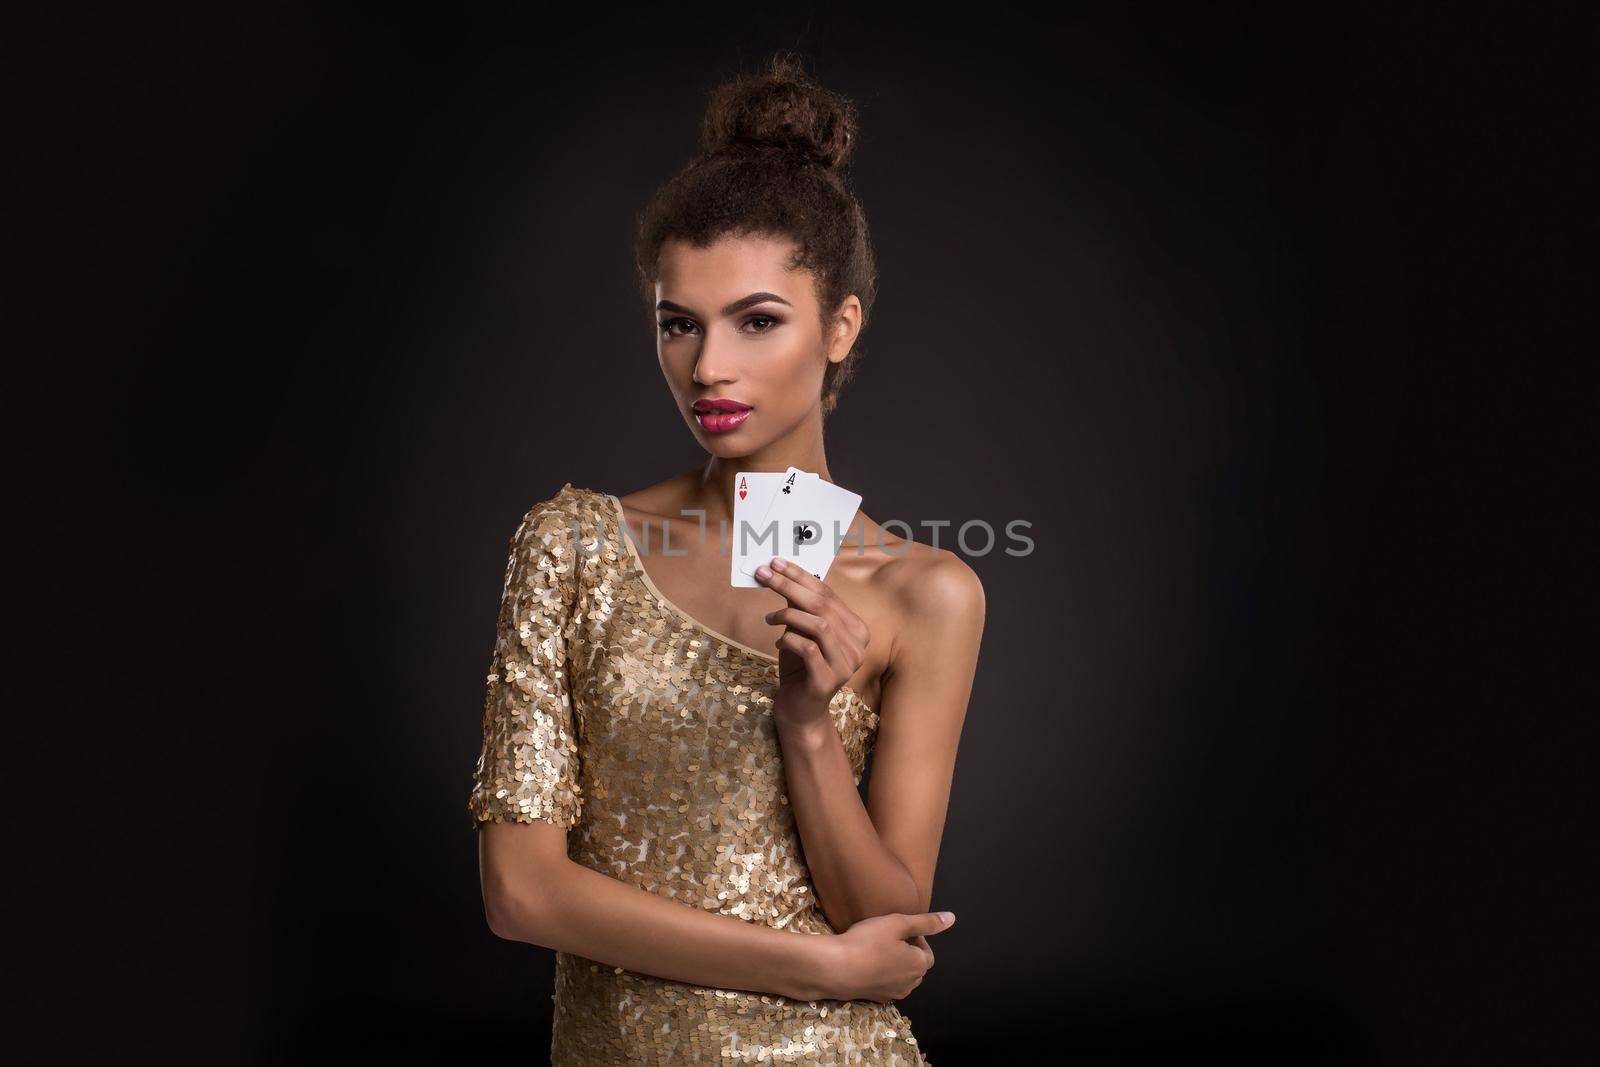 Woman winning - Young woman in a classy gold dress holding two aces, a poker of aces card combination. Studio shot on black background